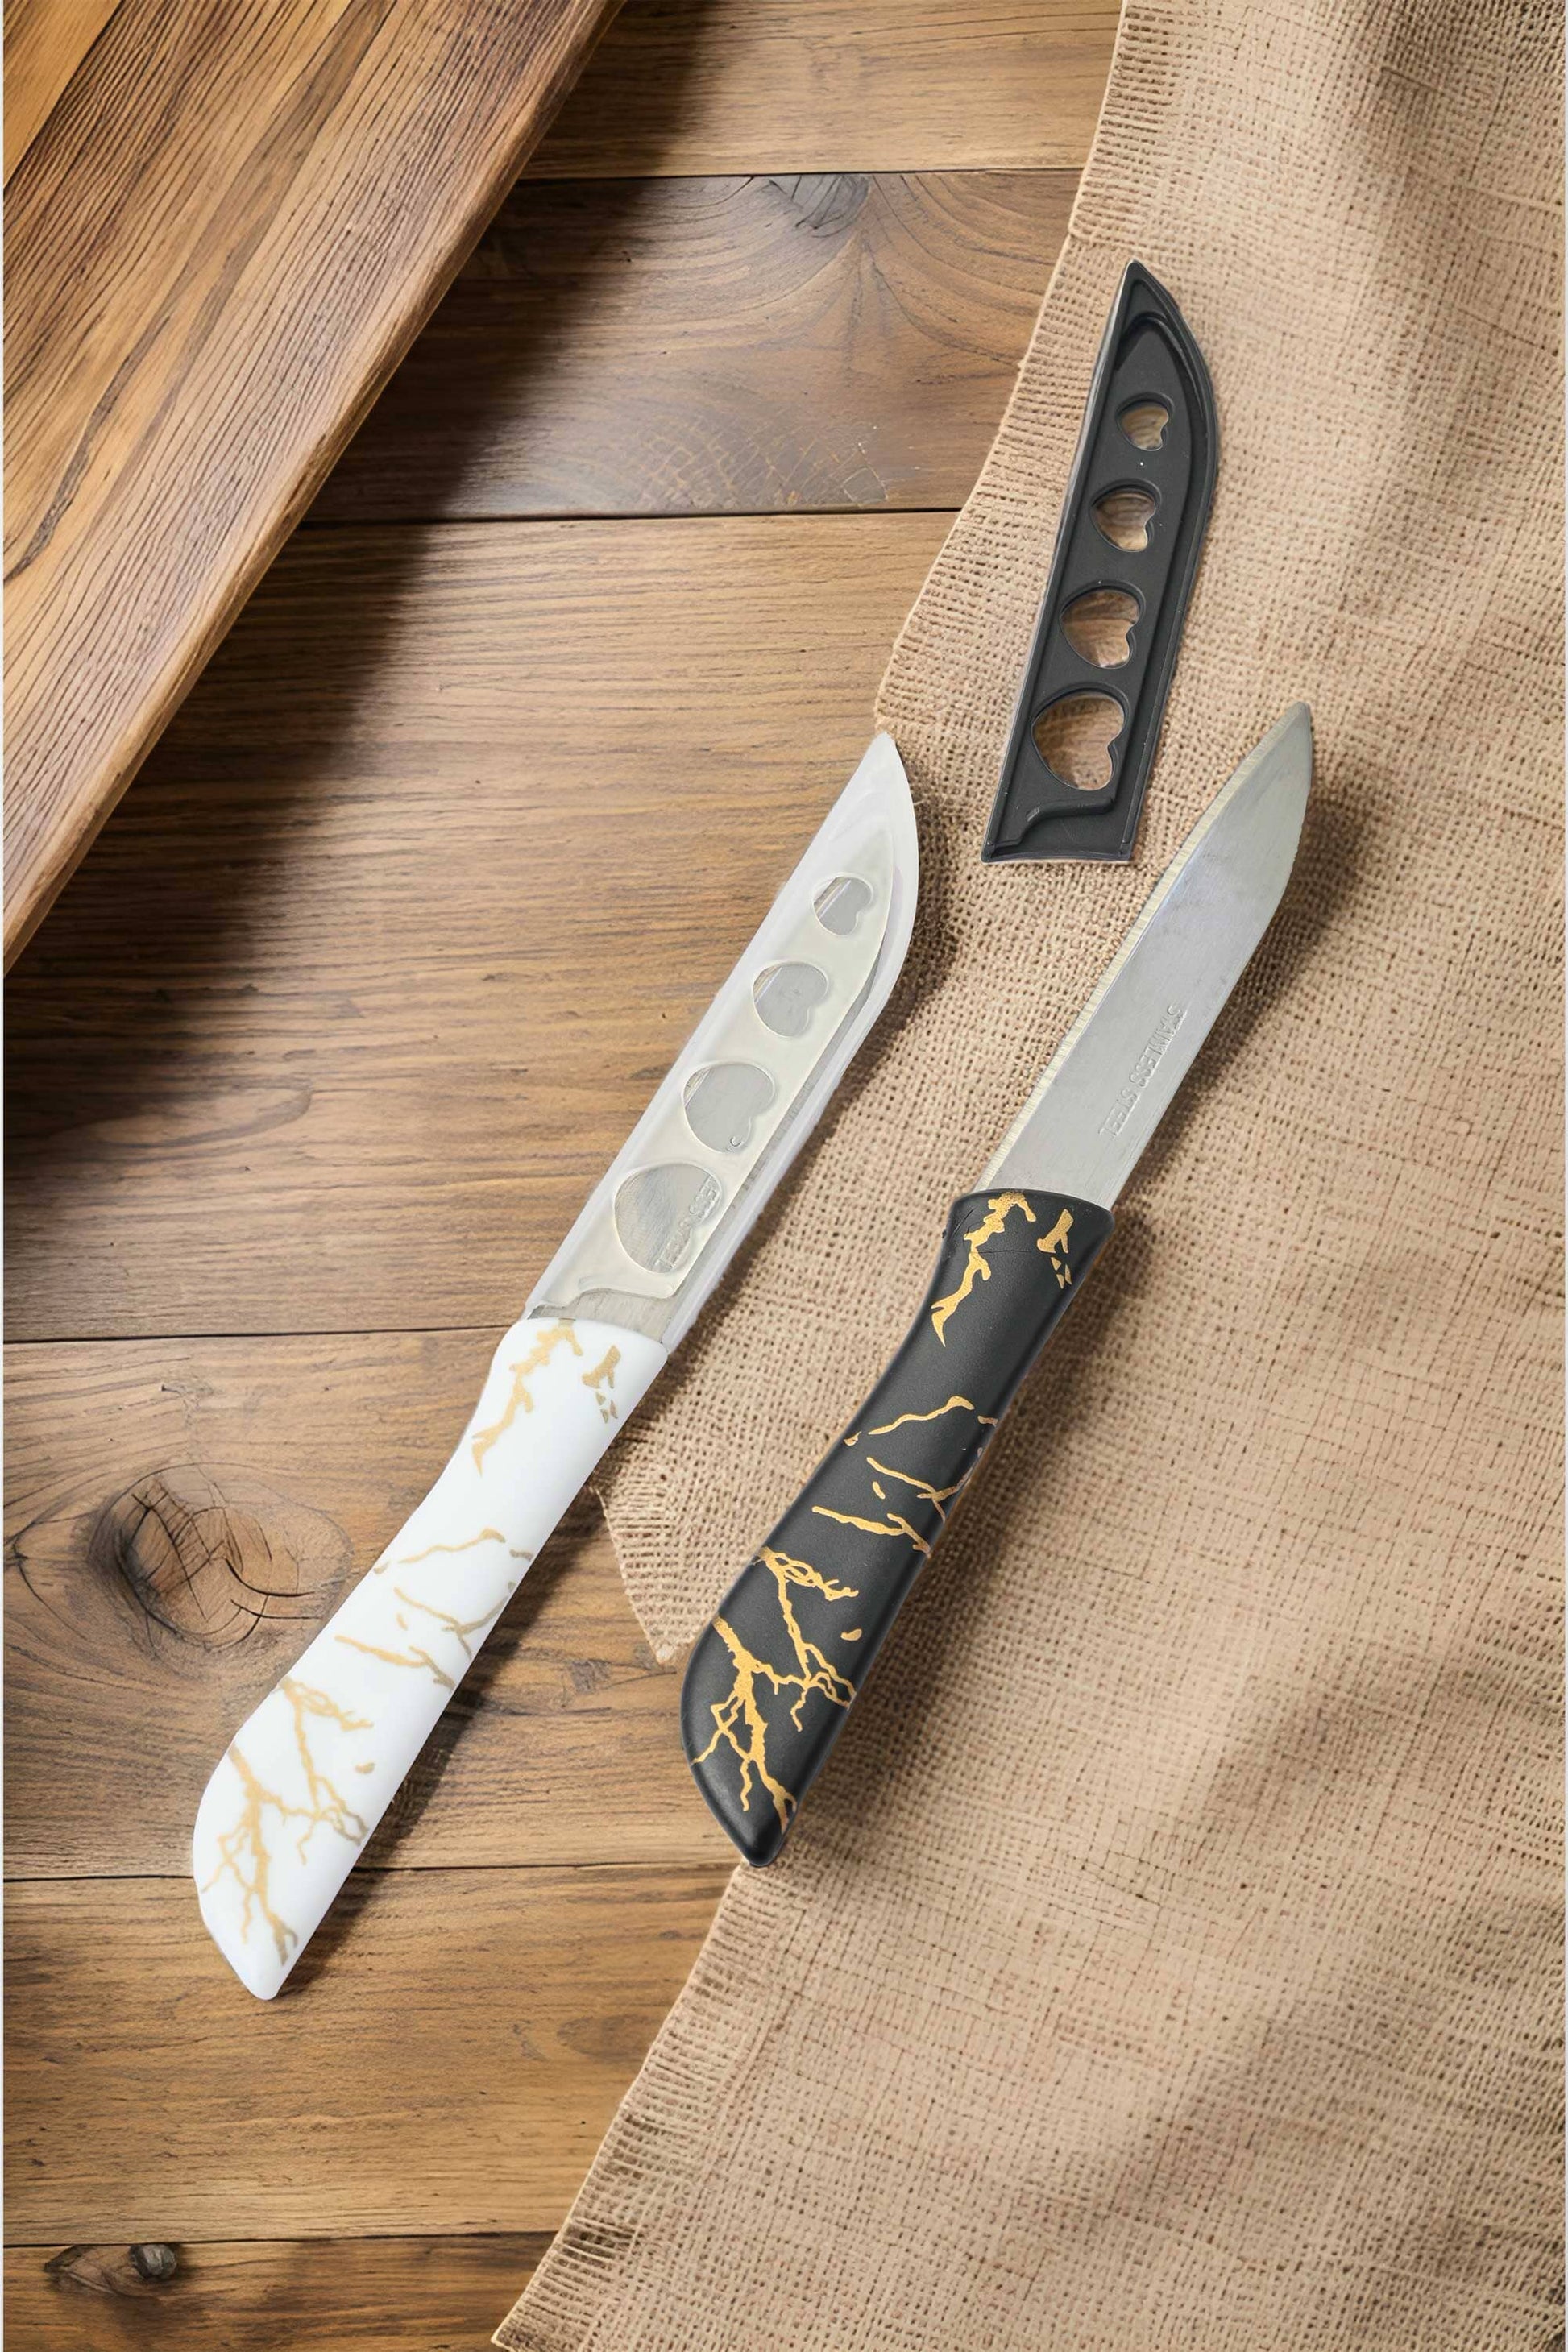 Stainless Steel Kitchen Knife With Cover